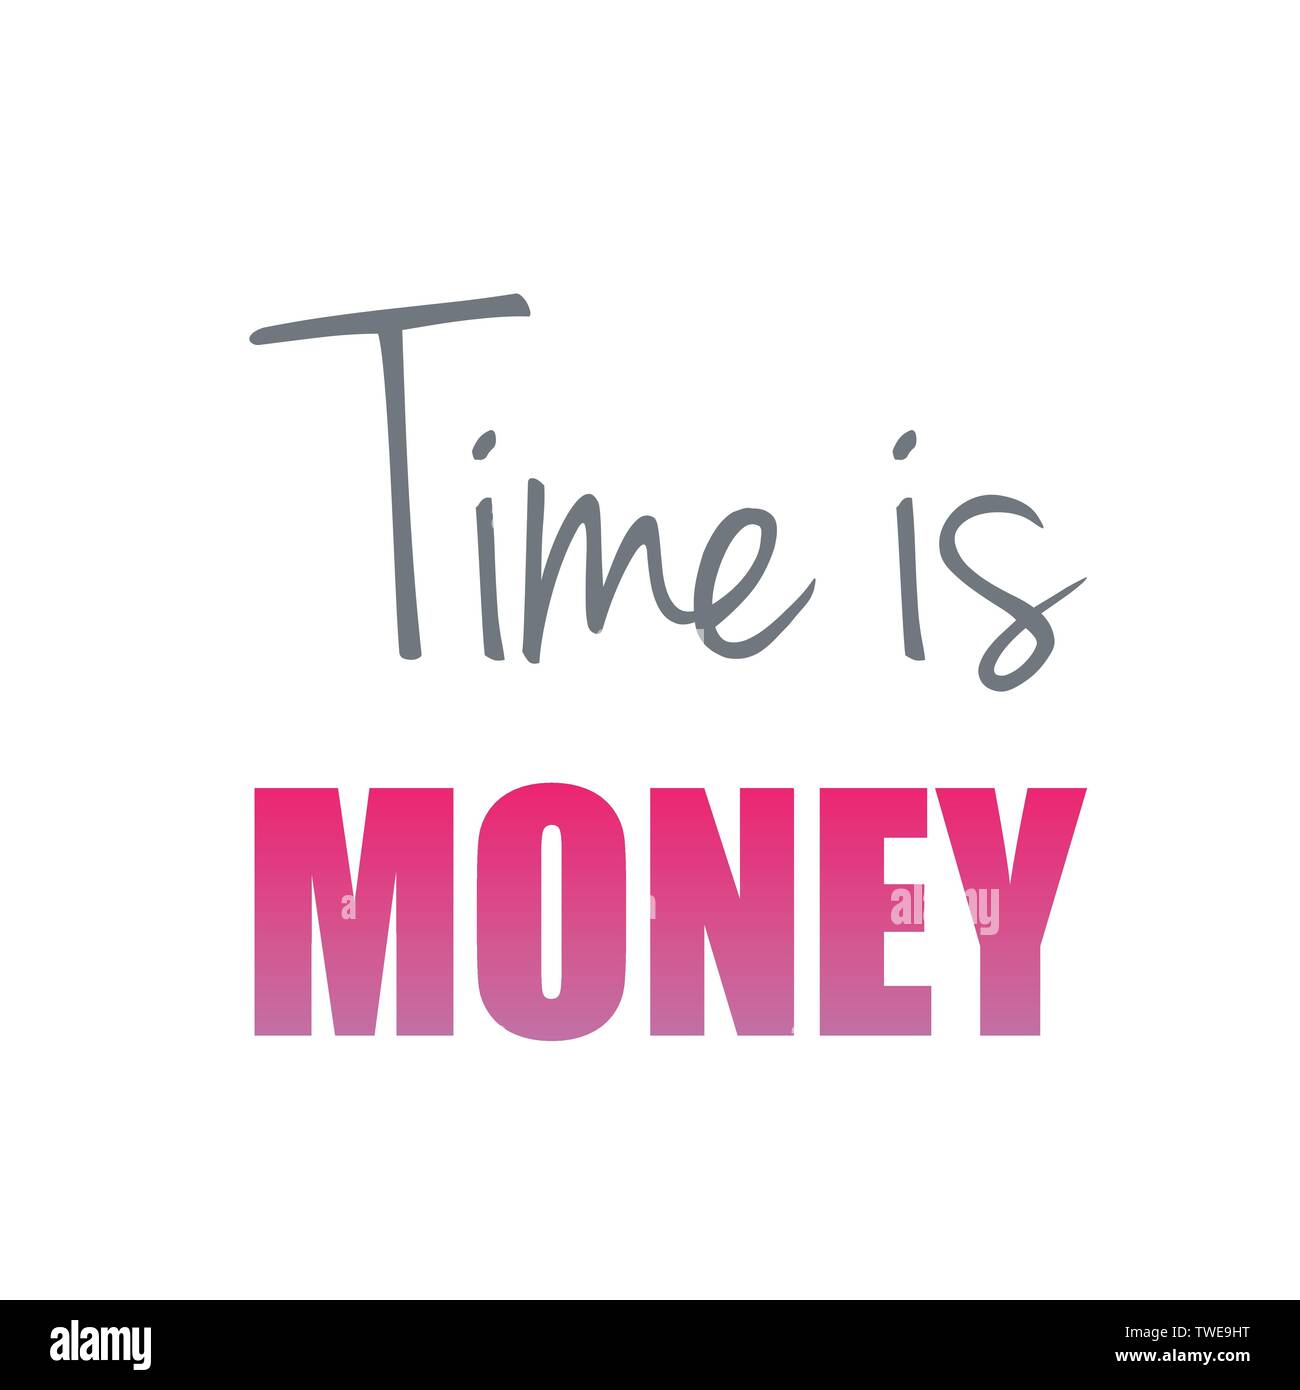 Time is money- Old English proverb to show the value of time Stock Vector